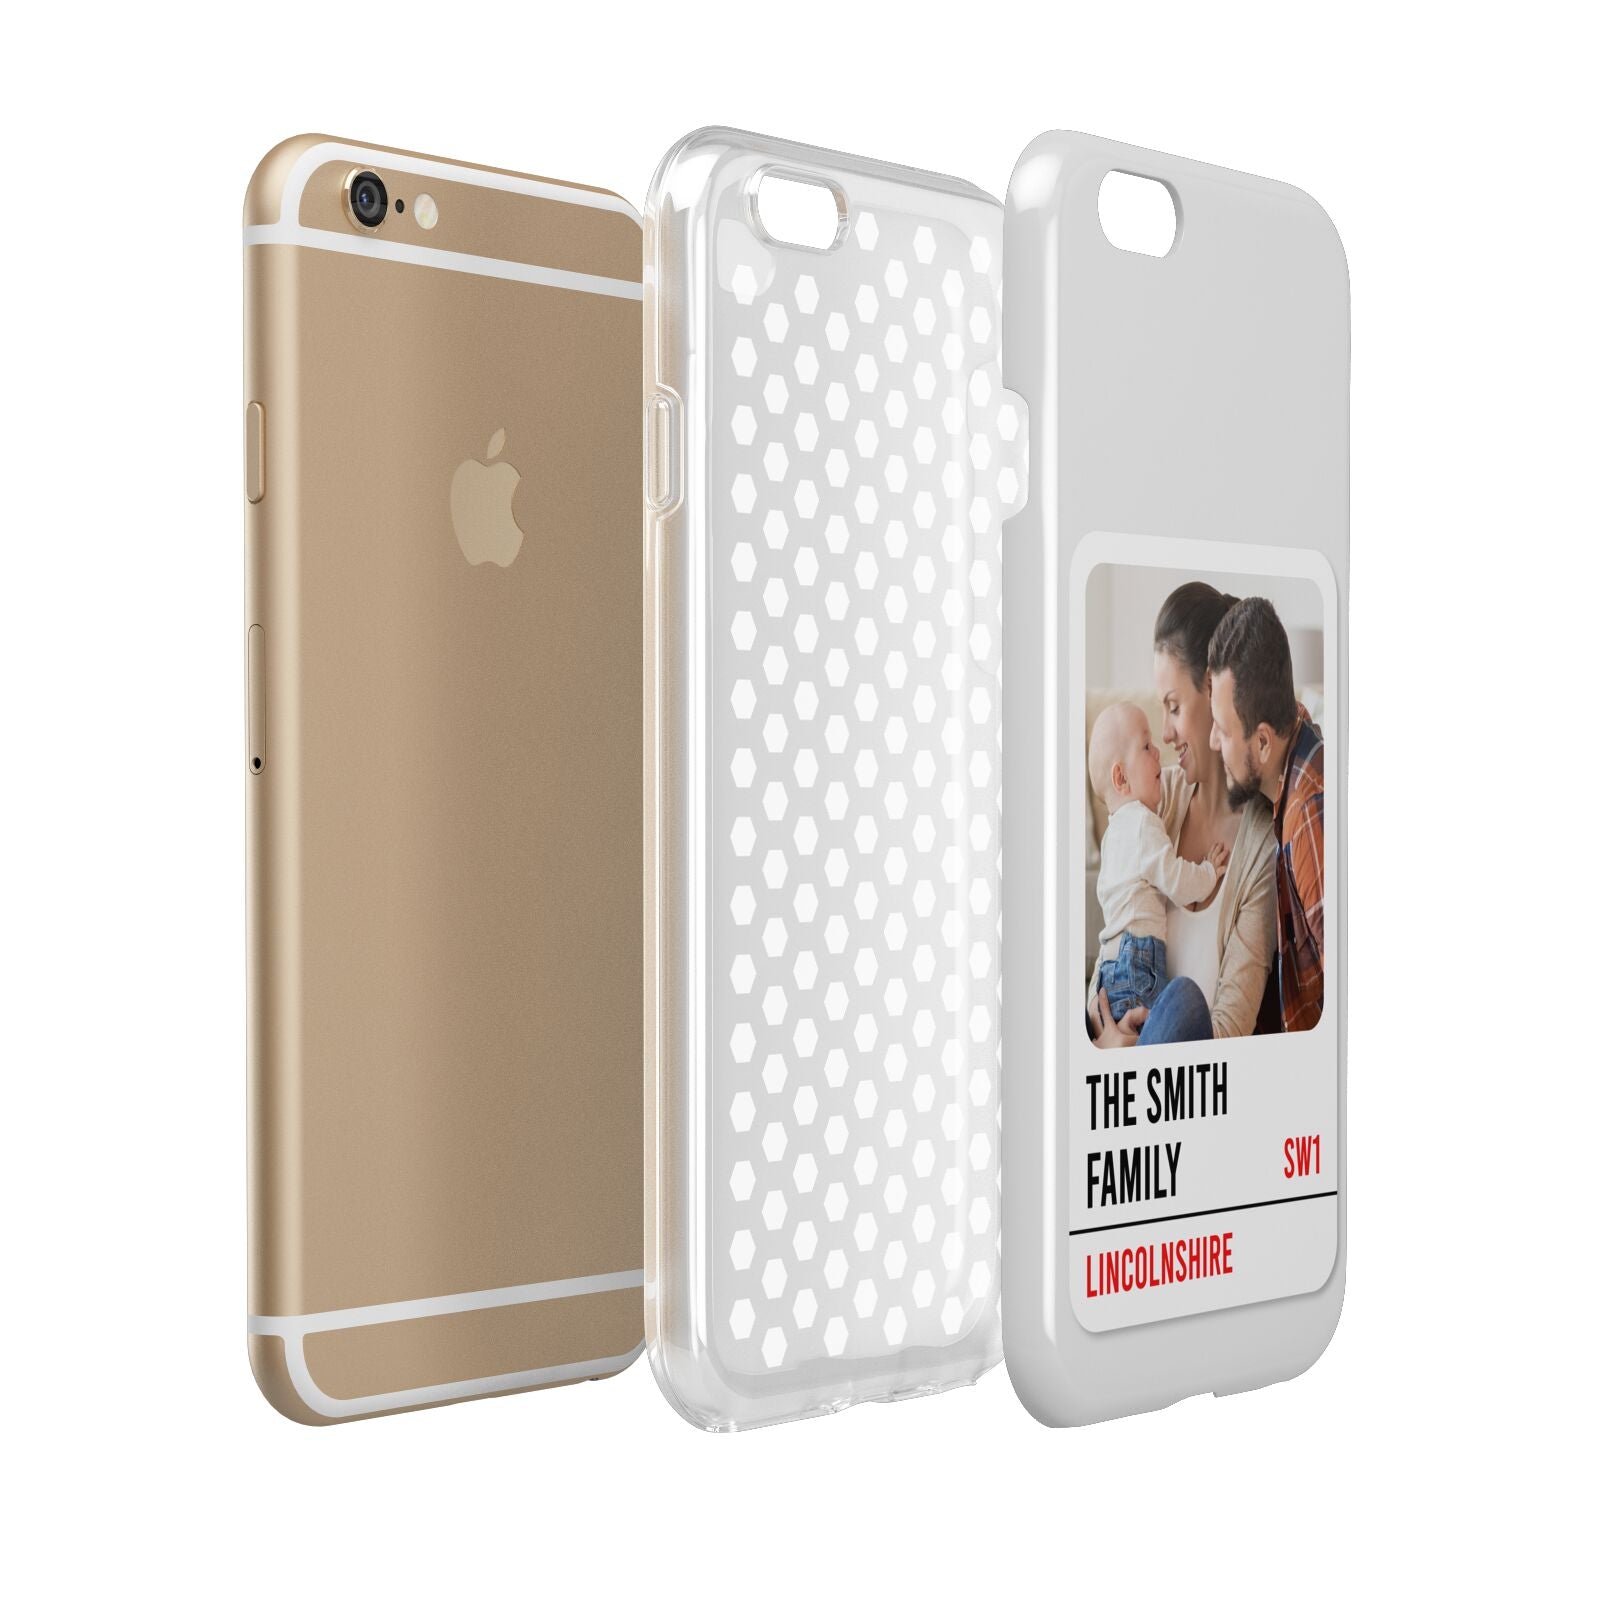 Street Sign Family Photo Upload Apple iPhone 6 3D Tough Case Expanded view